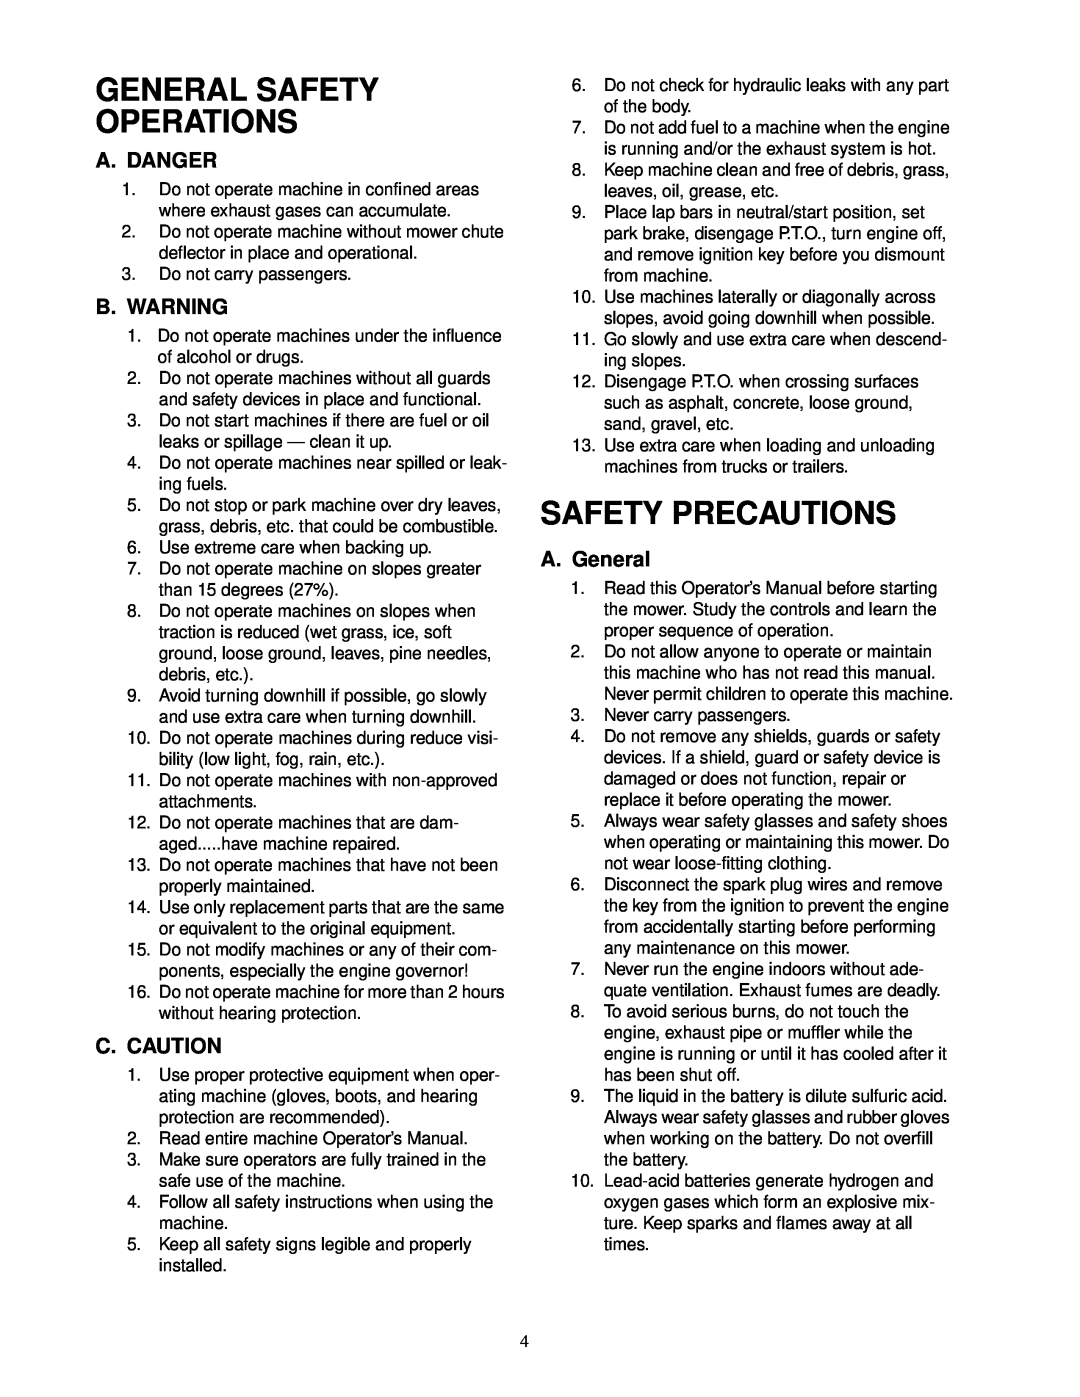 MTD 18HP service manual General Safety Operations, Safety Precautions, A. Danger, B. Warning, C. Caution, A. General 